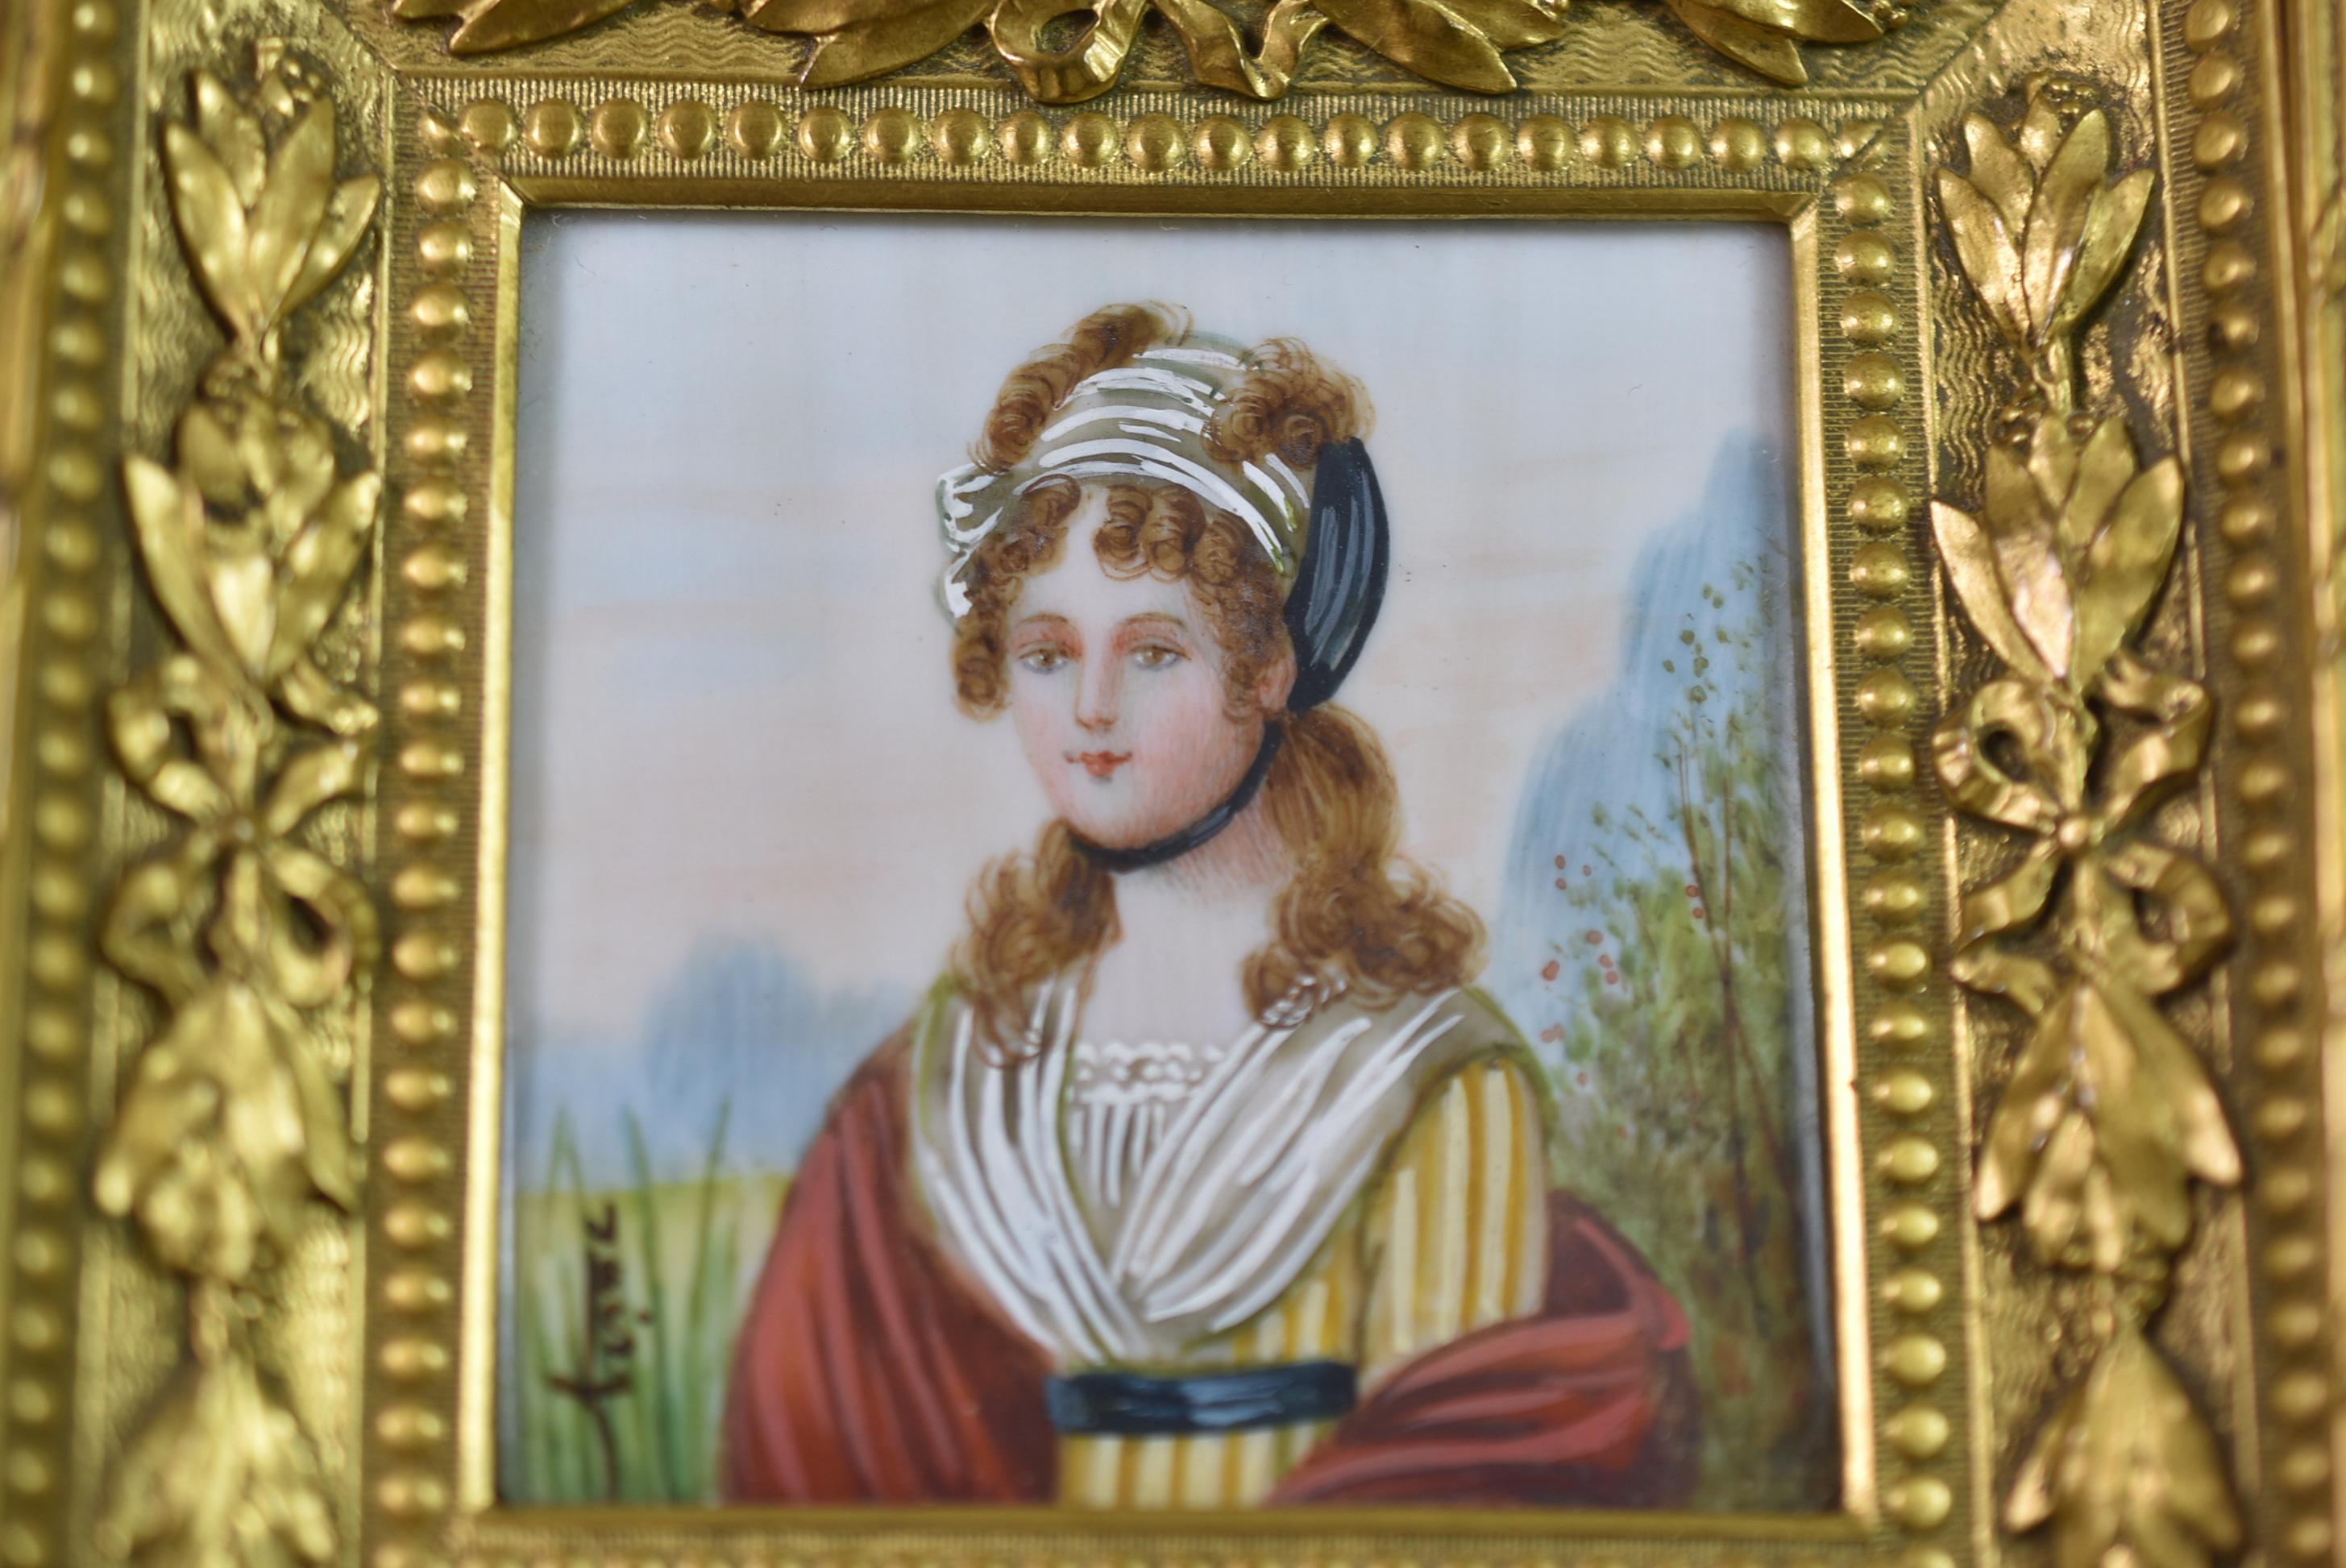 Hand painted miniature portrait of a woman in a yellow gown. French bronze frame with gold dore finish. Image measures 1.69